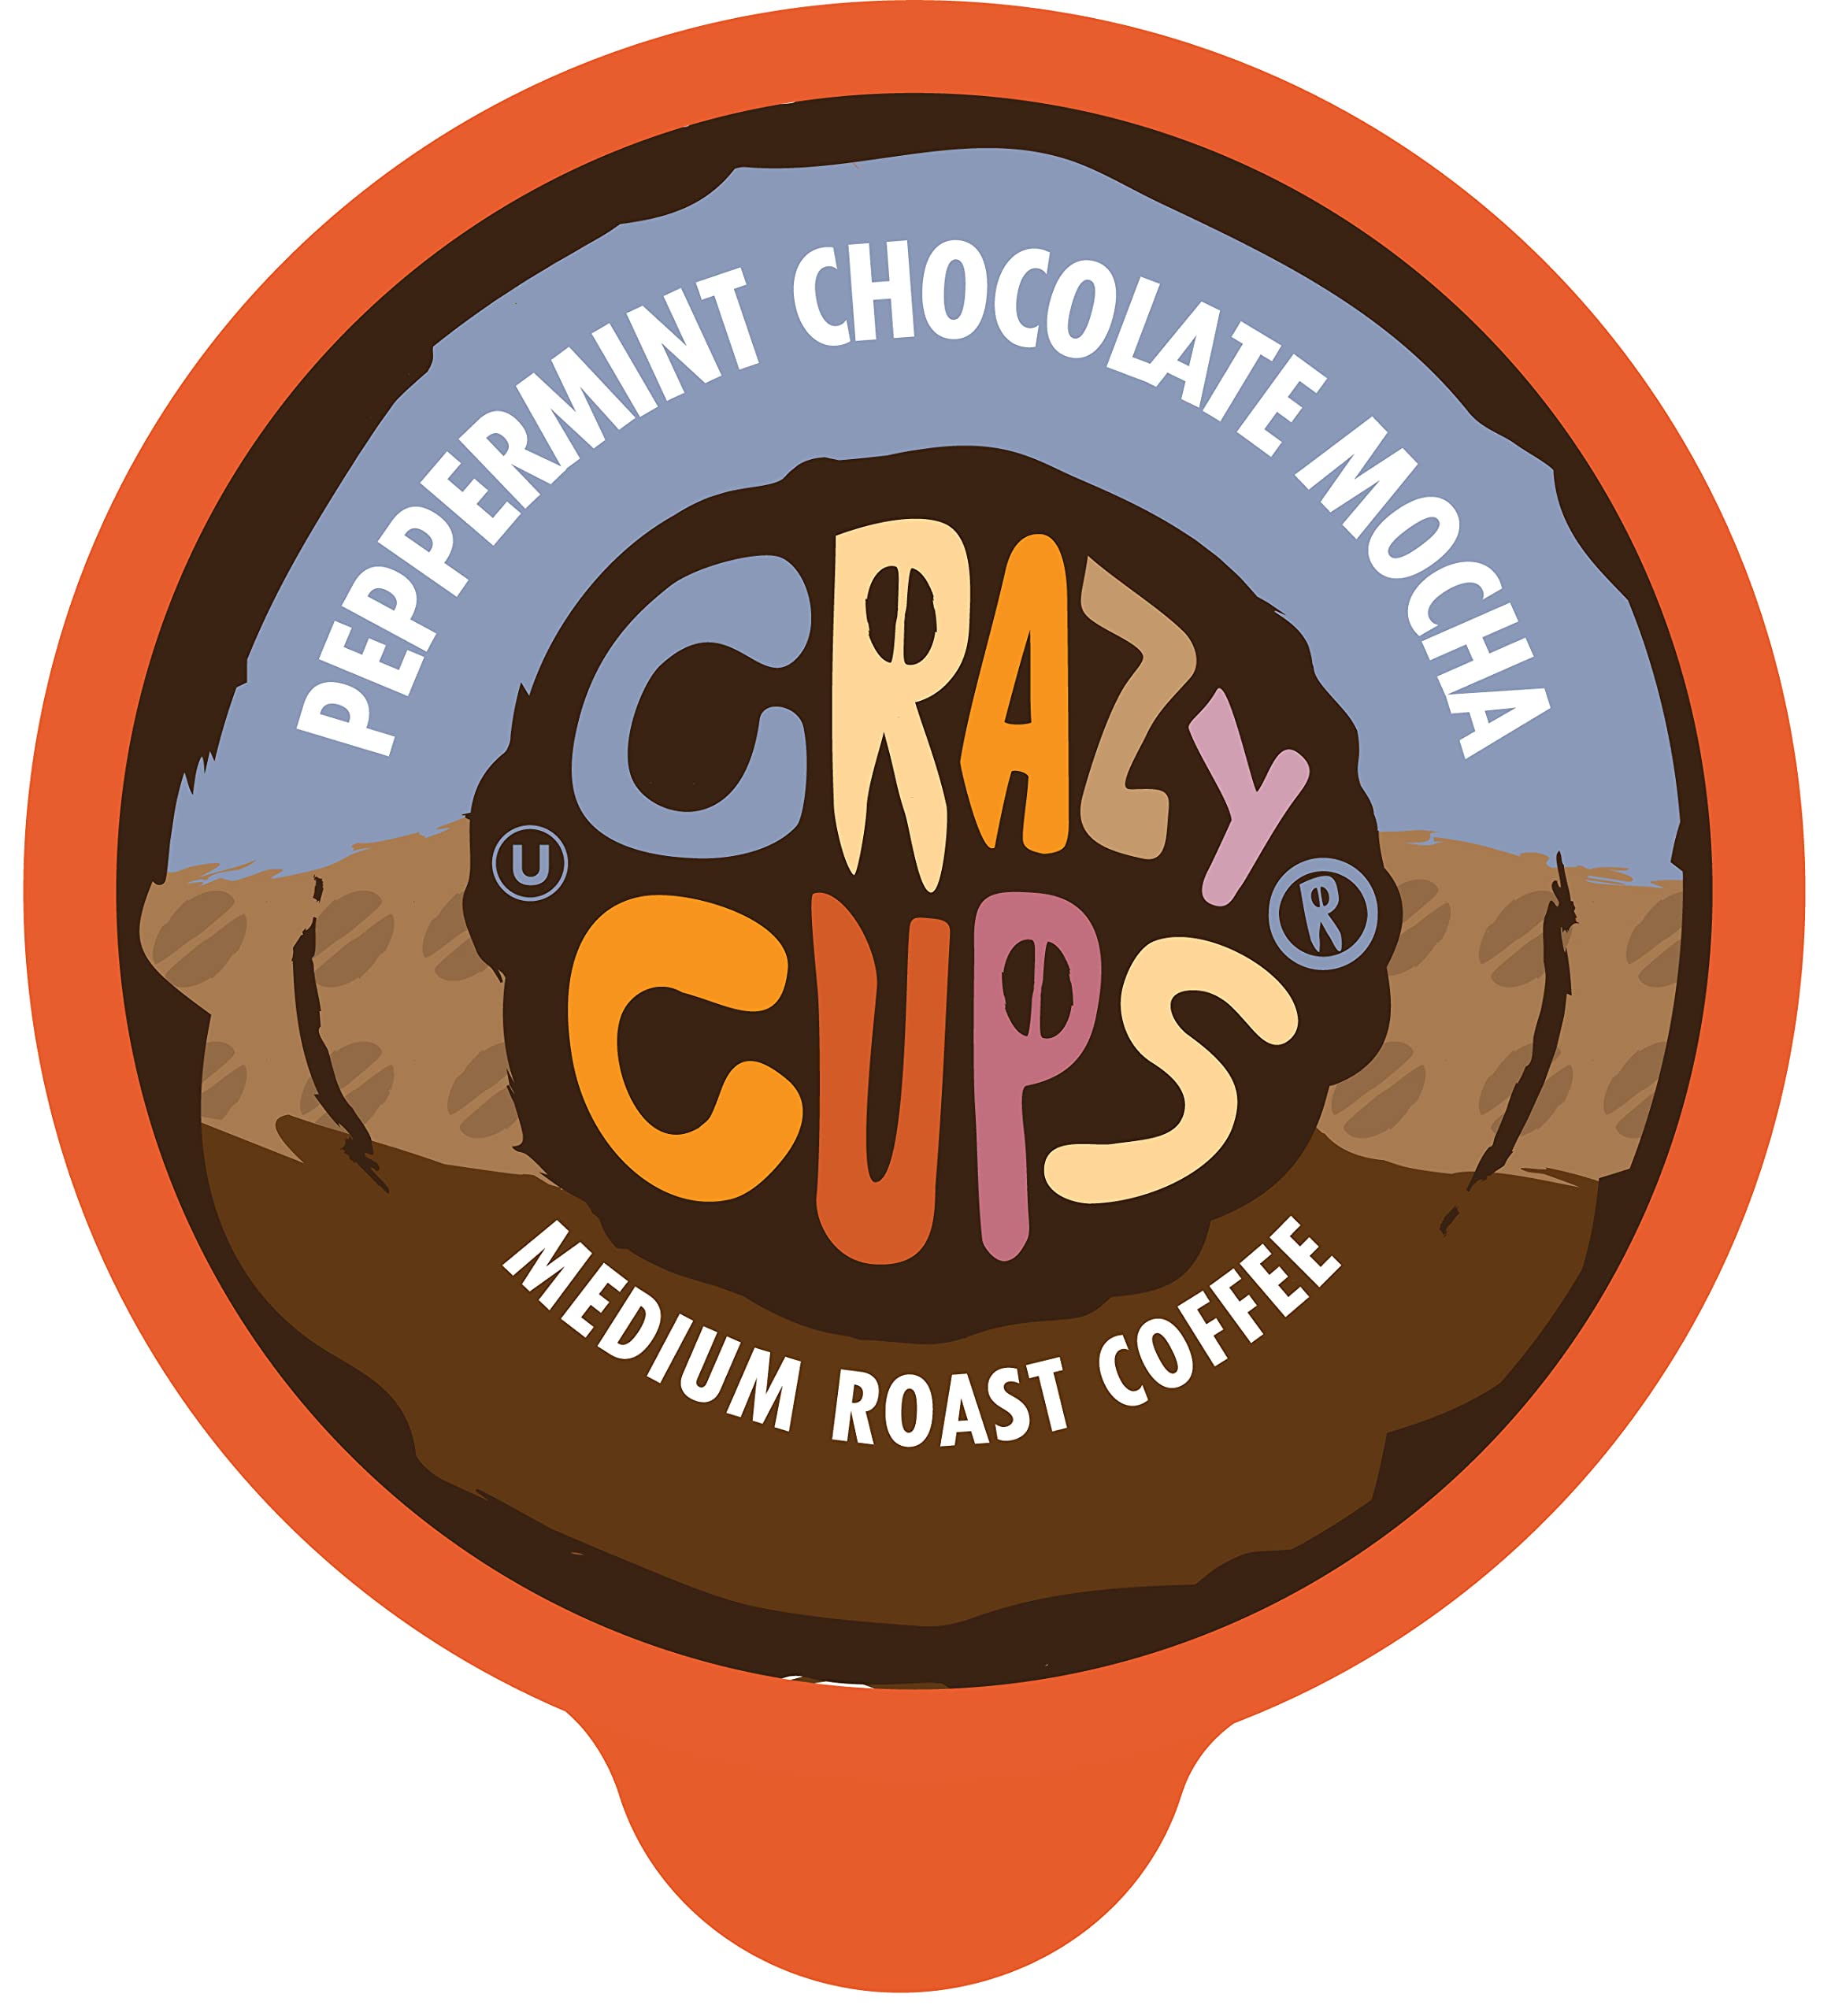 Crazy Cups Flavored Coffee for Keurig K-Cup Machines, Peppermint Chocolate Mocha, Hot or Iced Drinks, 22 Single Serve, Recyclabl